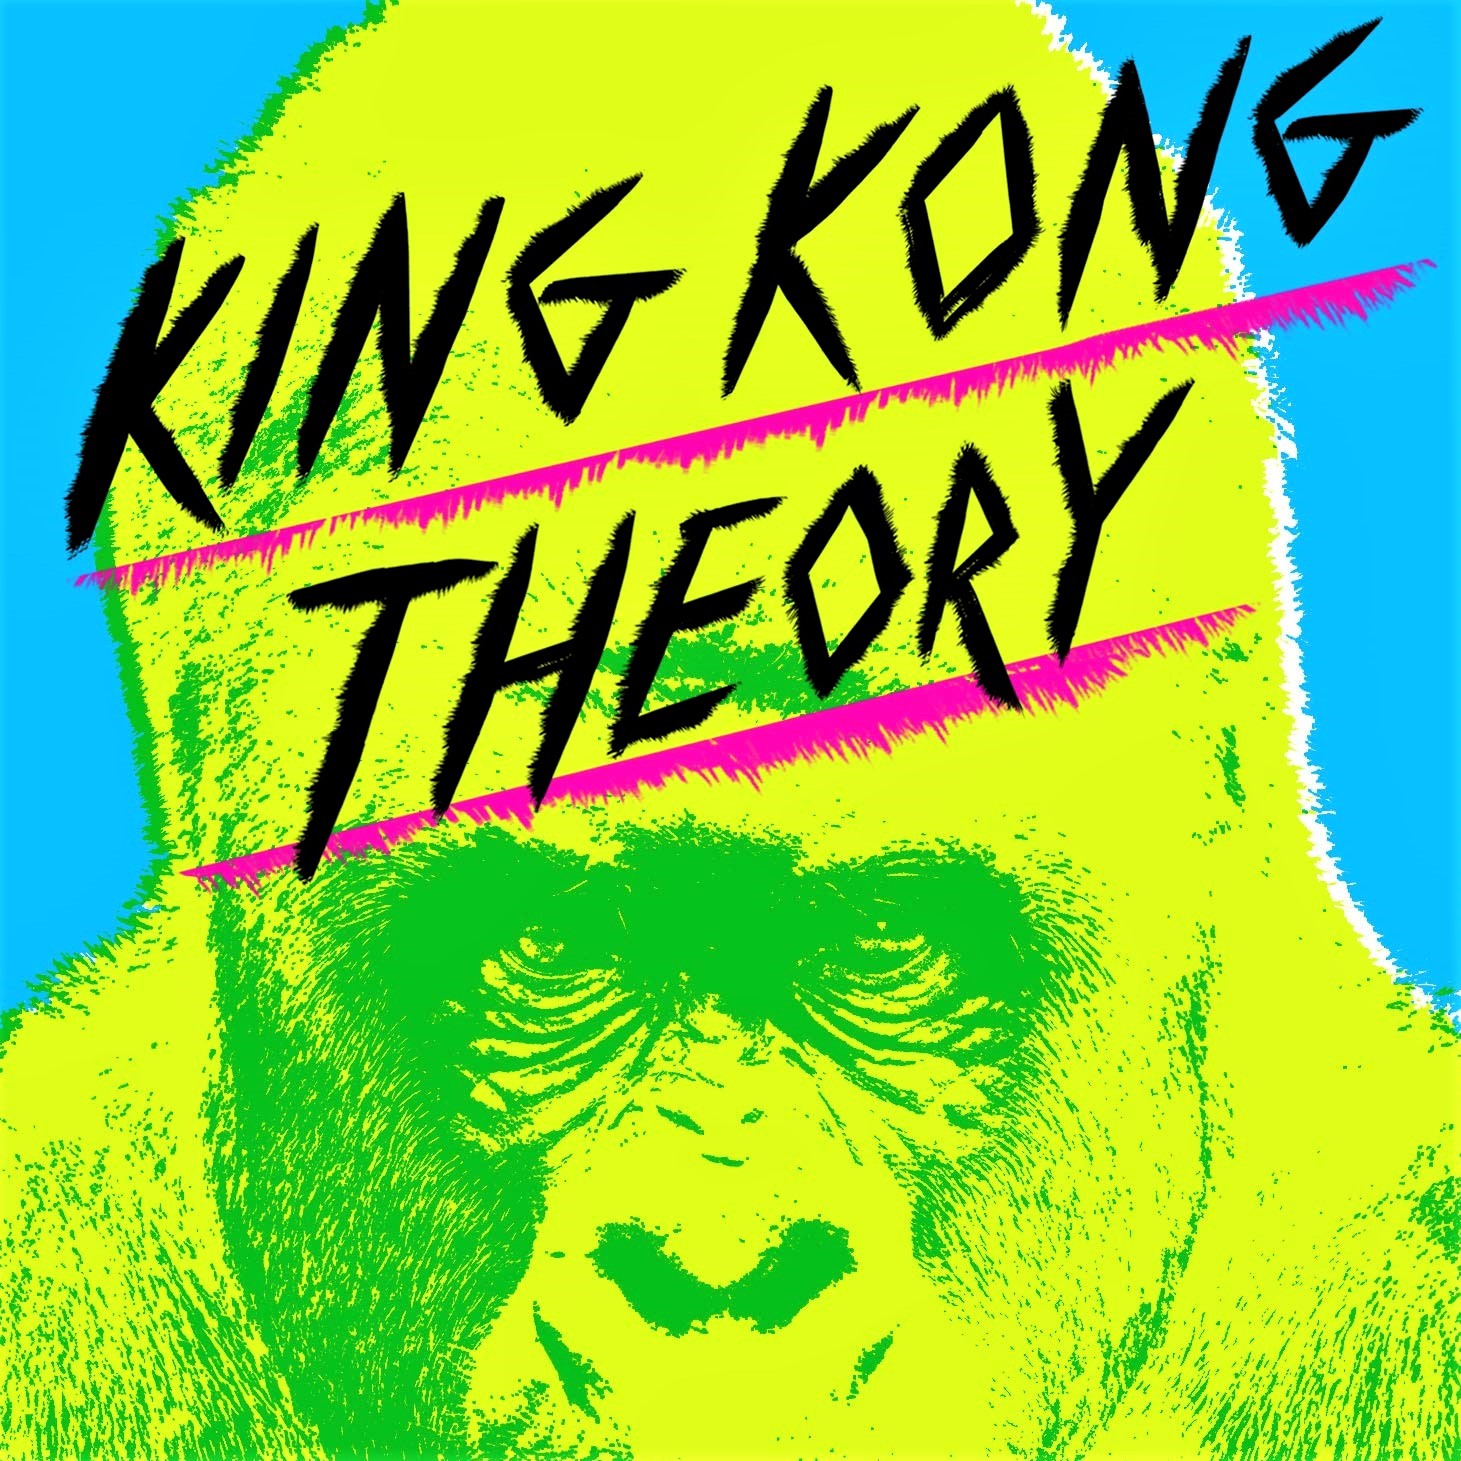 Cover image of Virginie Despentes's book, 'King Kong Theory'